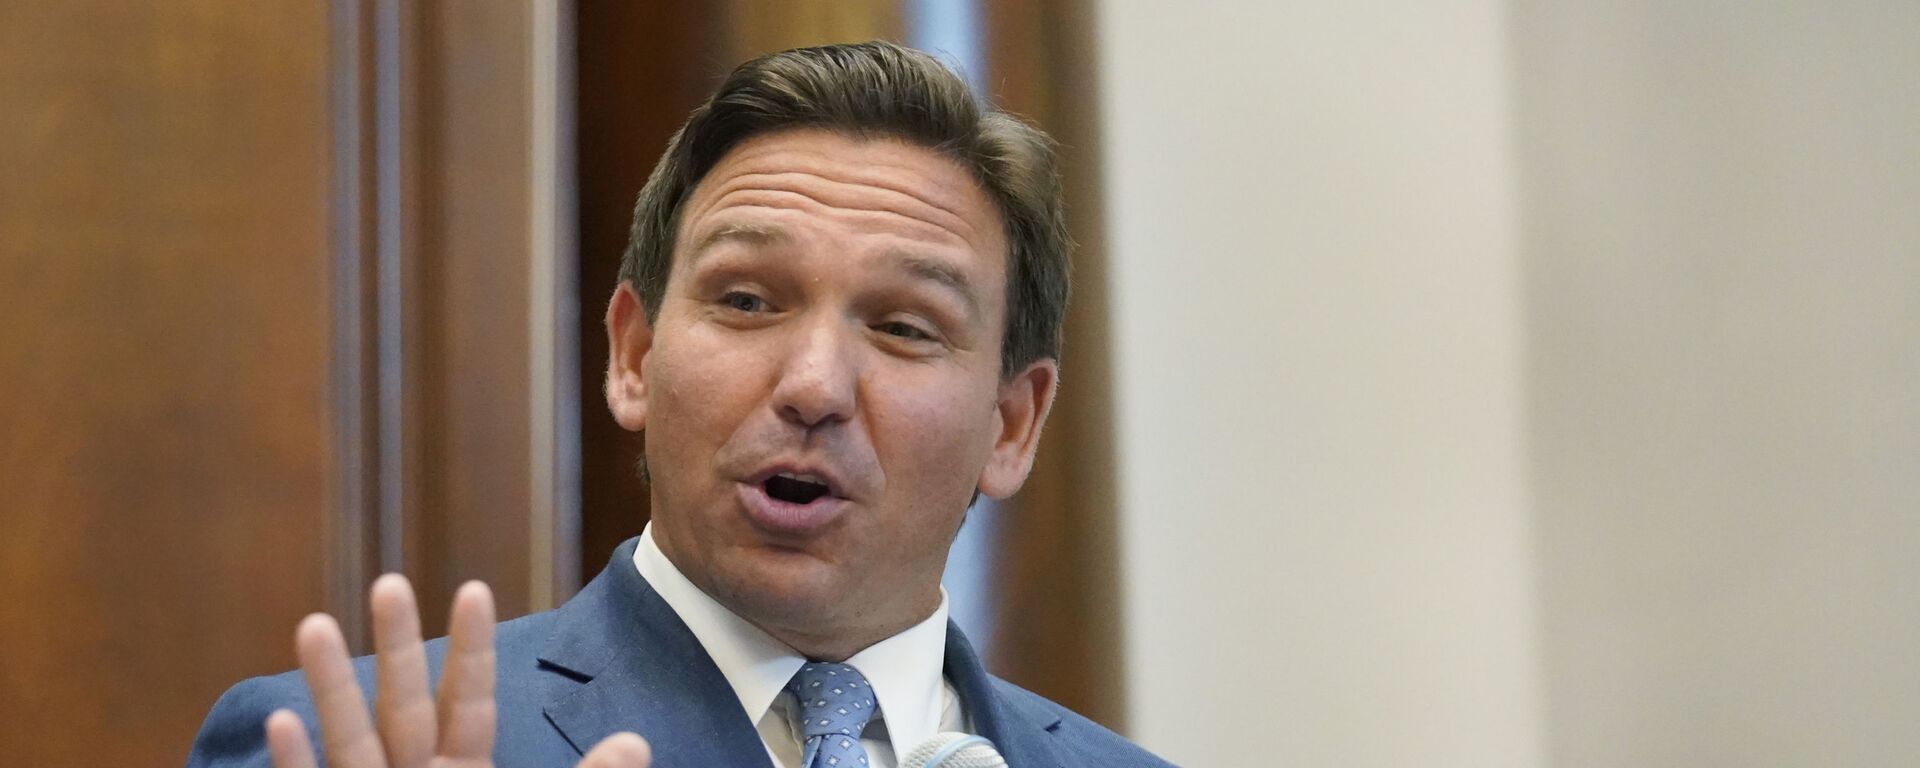 Florida Gov. Ron DeSantis gestures as he speaks, Monday, June 14, 2021, at the Shul of Bal Harbour, a Jewish community center in Surfside, Fla. DeSantis visited the South Florida temple to denounce anti-Semitism and stand with Israel, while signing a bill into law that would require public schools in his state to set aside moments of silence for children to meditate or pray - Sputnik International, 1920, 31.01.2022